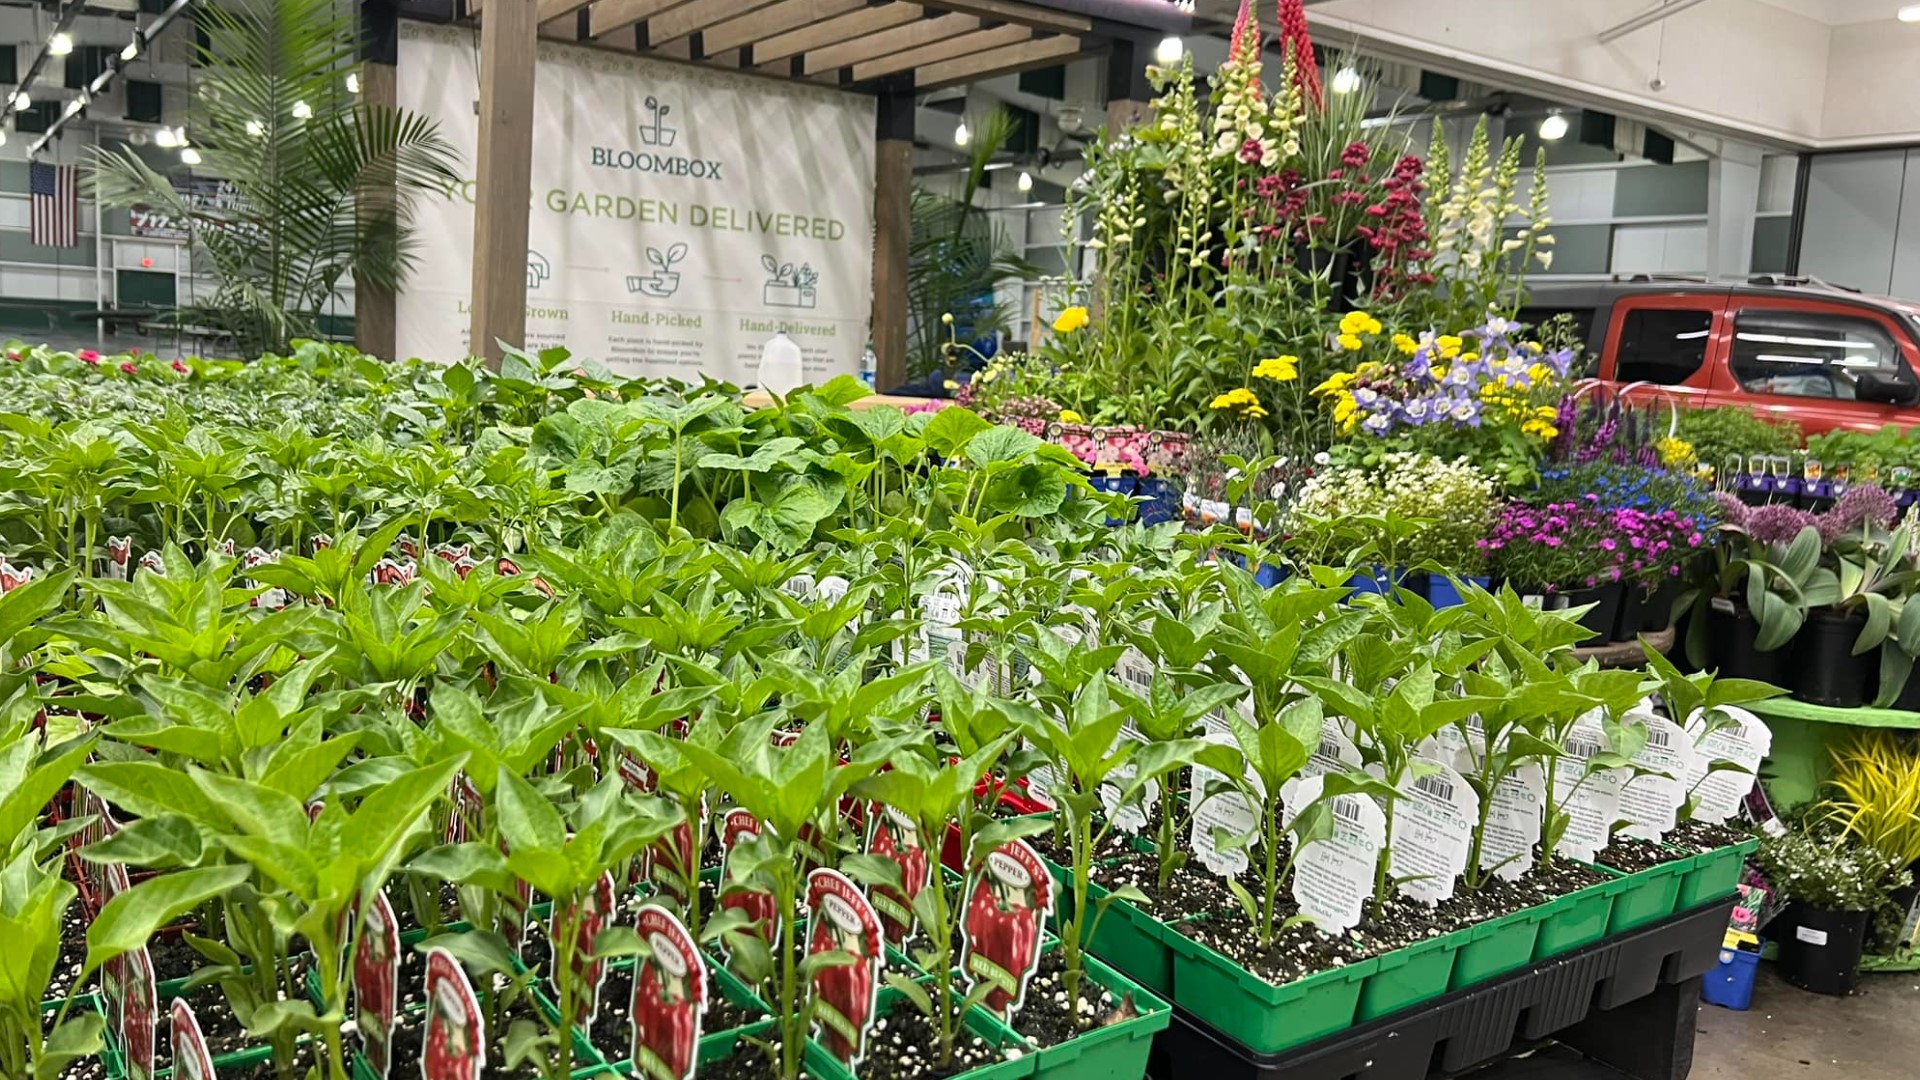 The annual Pennsylvania Herb and Garden Festival returns to the York Expo Center today. Workshop, tastings and more will be available for patrons.